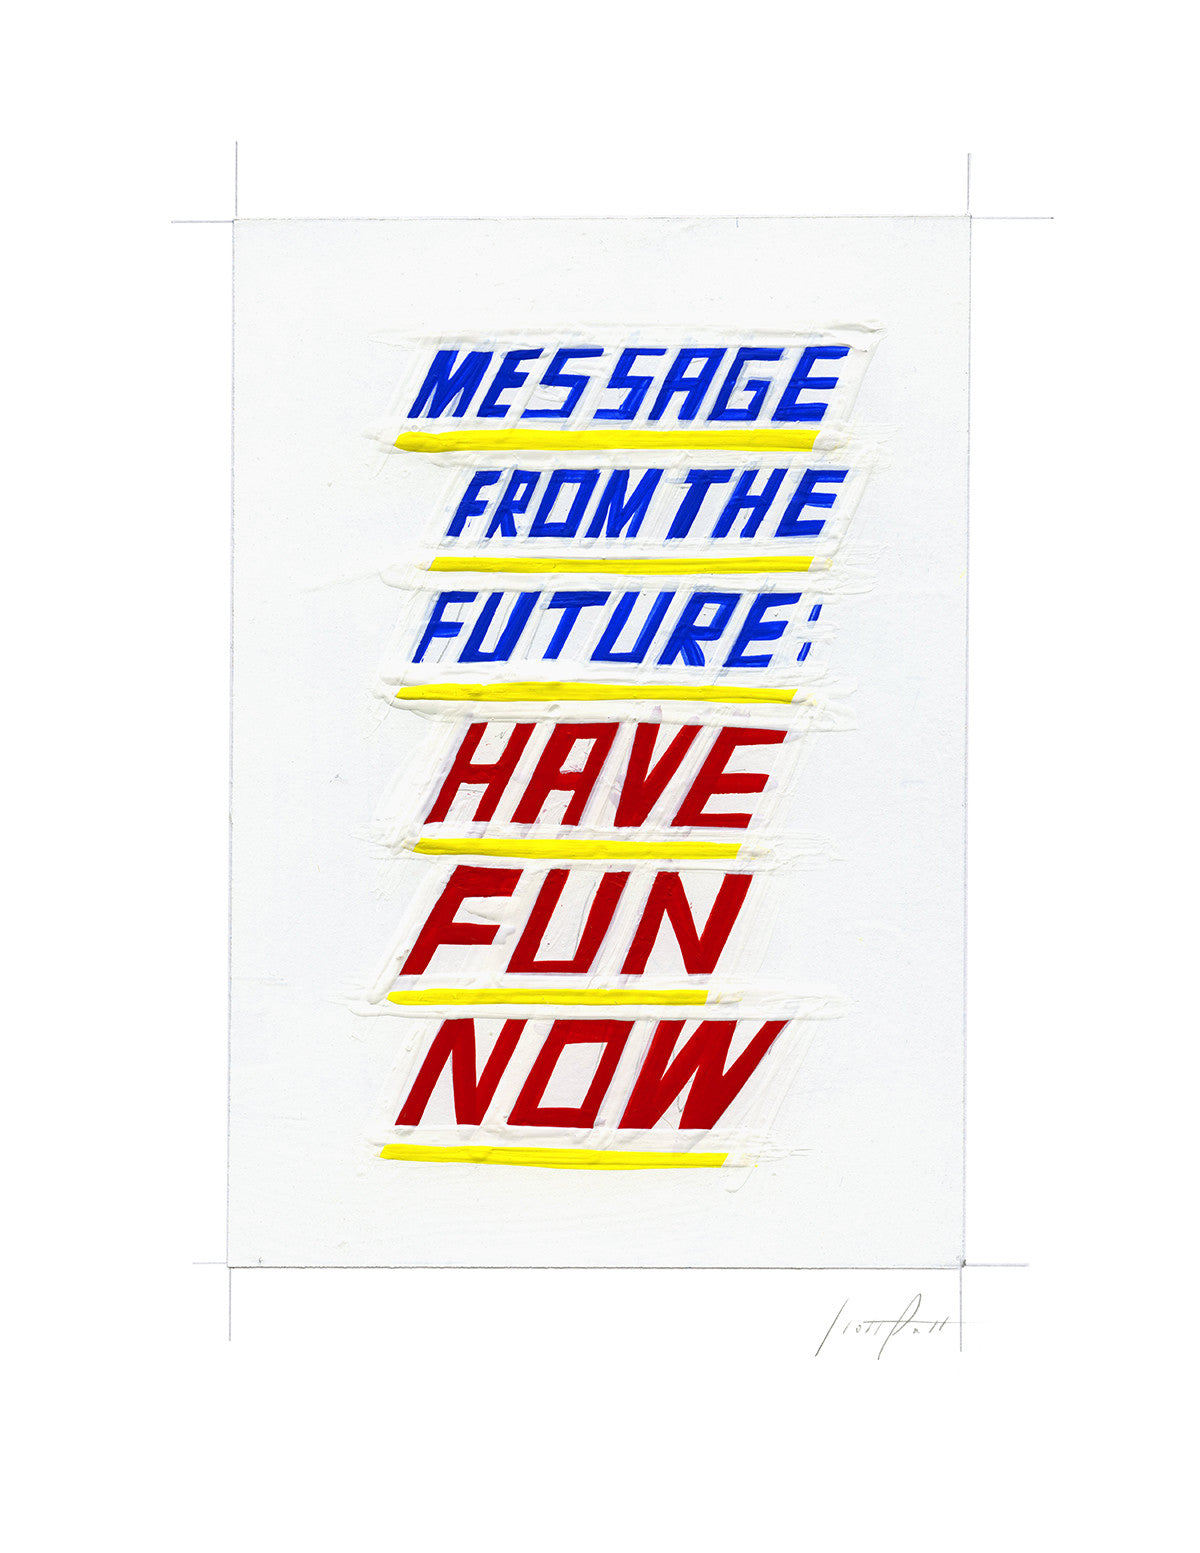 #228 MESSAGE FROM THE FUTURE no. 1